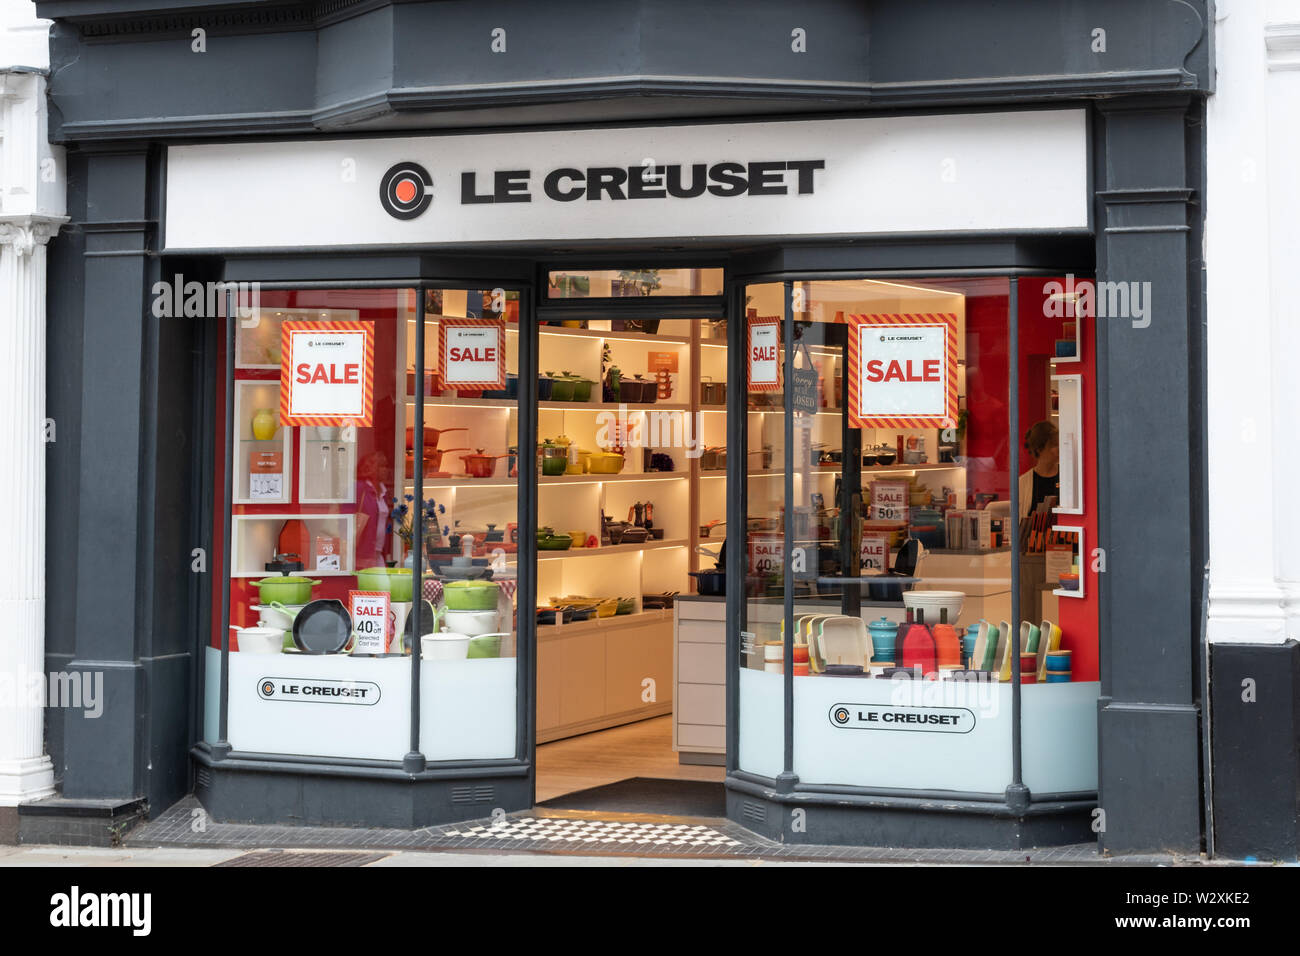 Le creuset sign hires stock photography and images Alamy